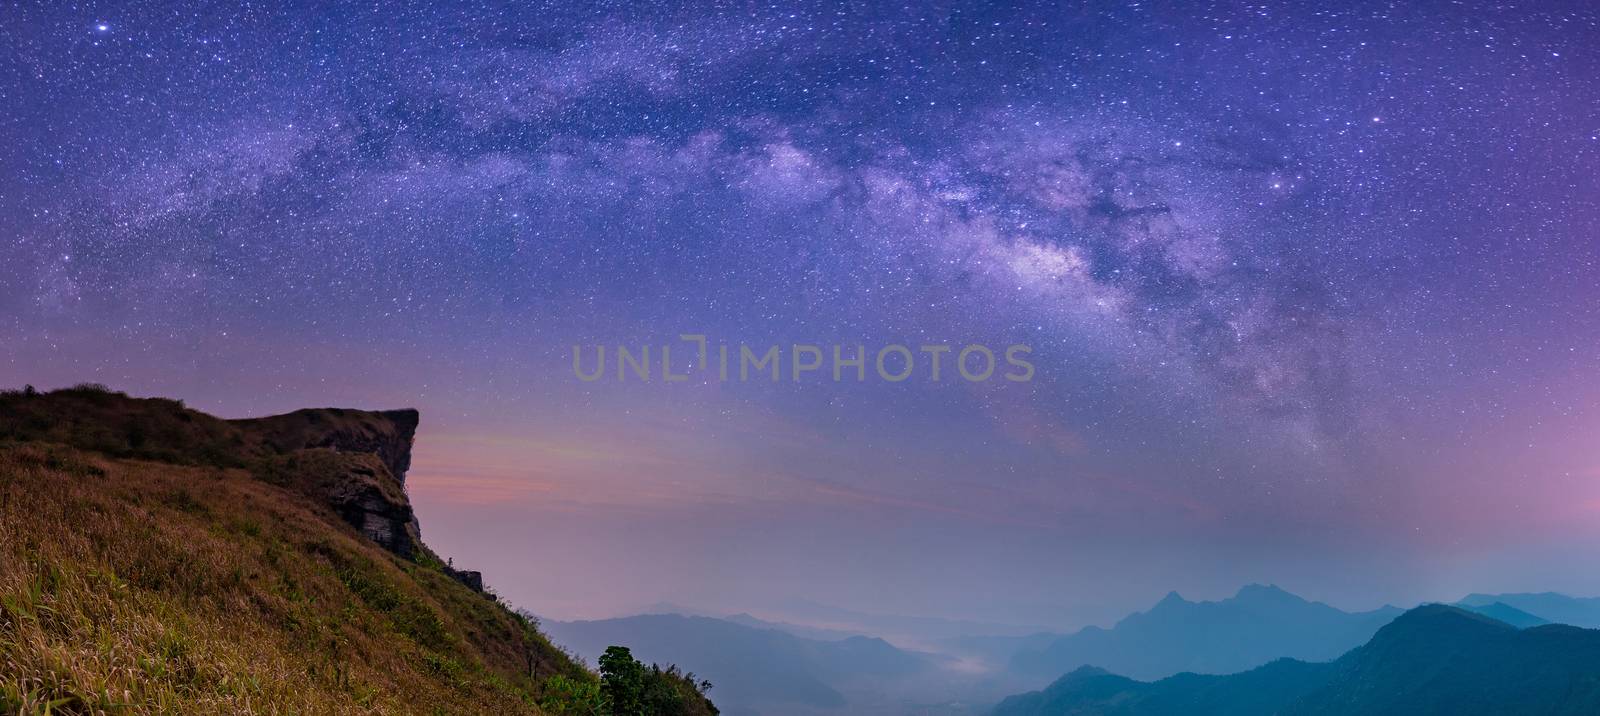 Abstract blurred landscape with Milky way galaxy Night sky with  by chanwity